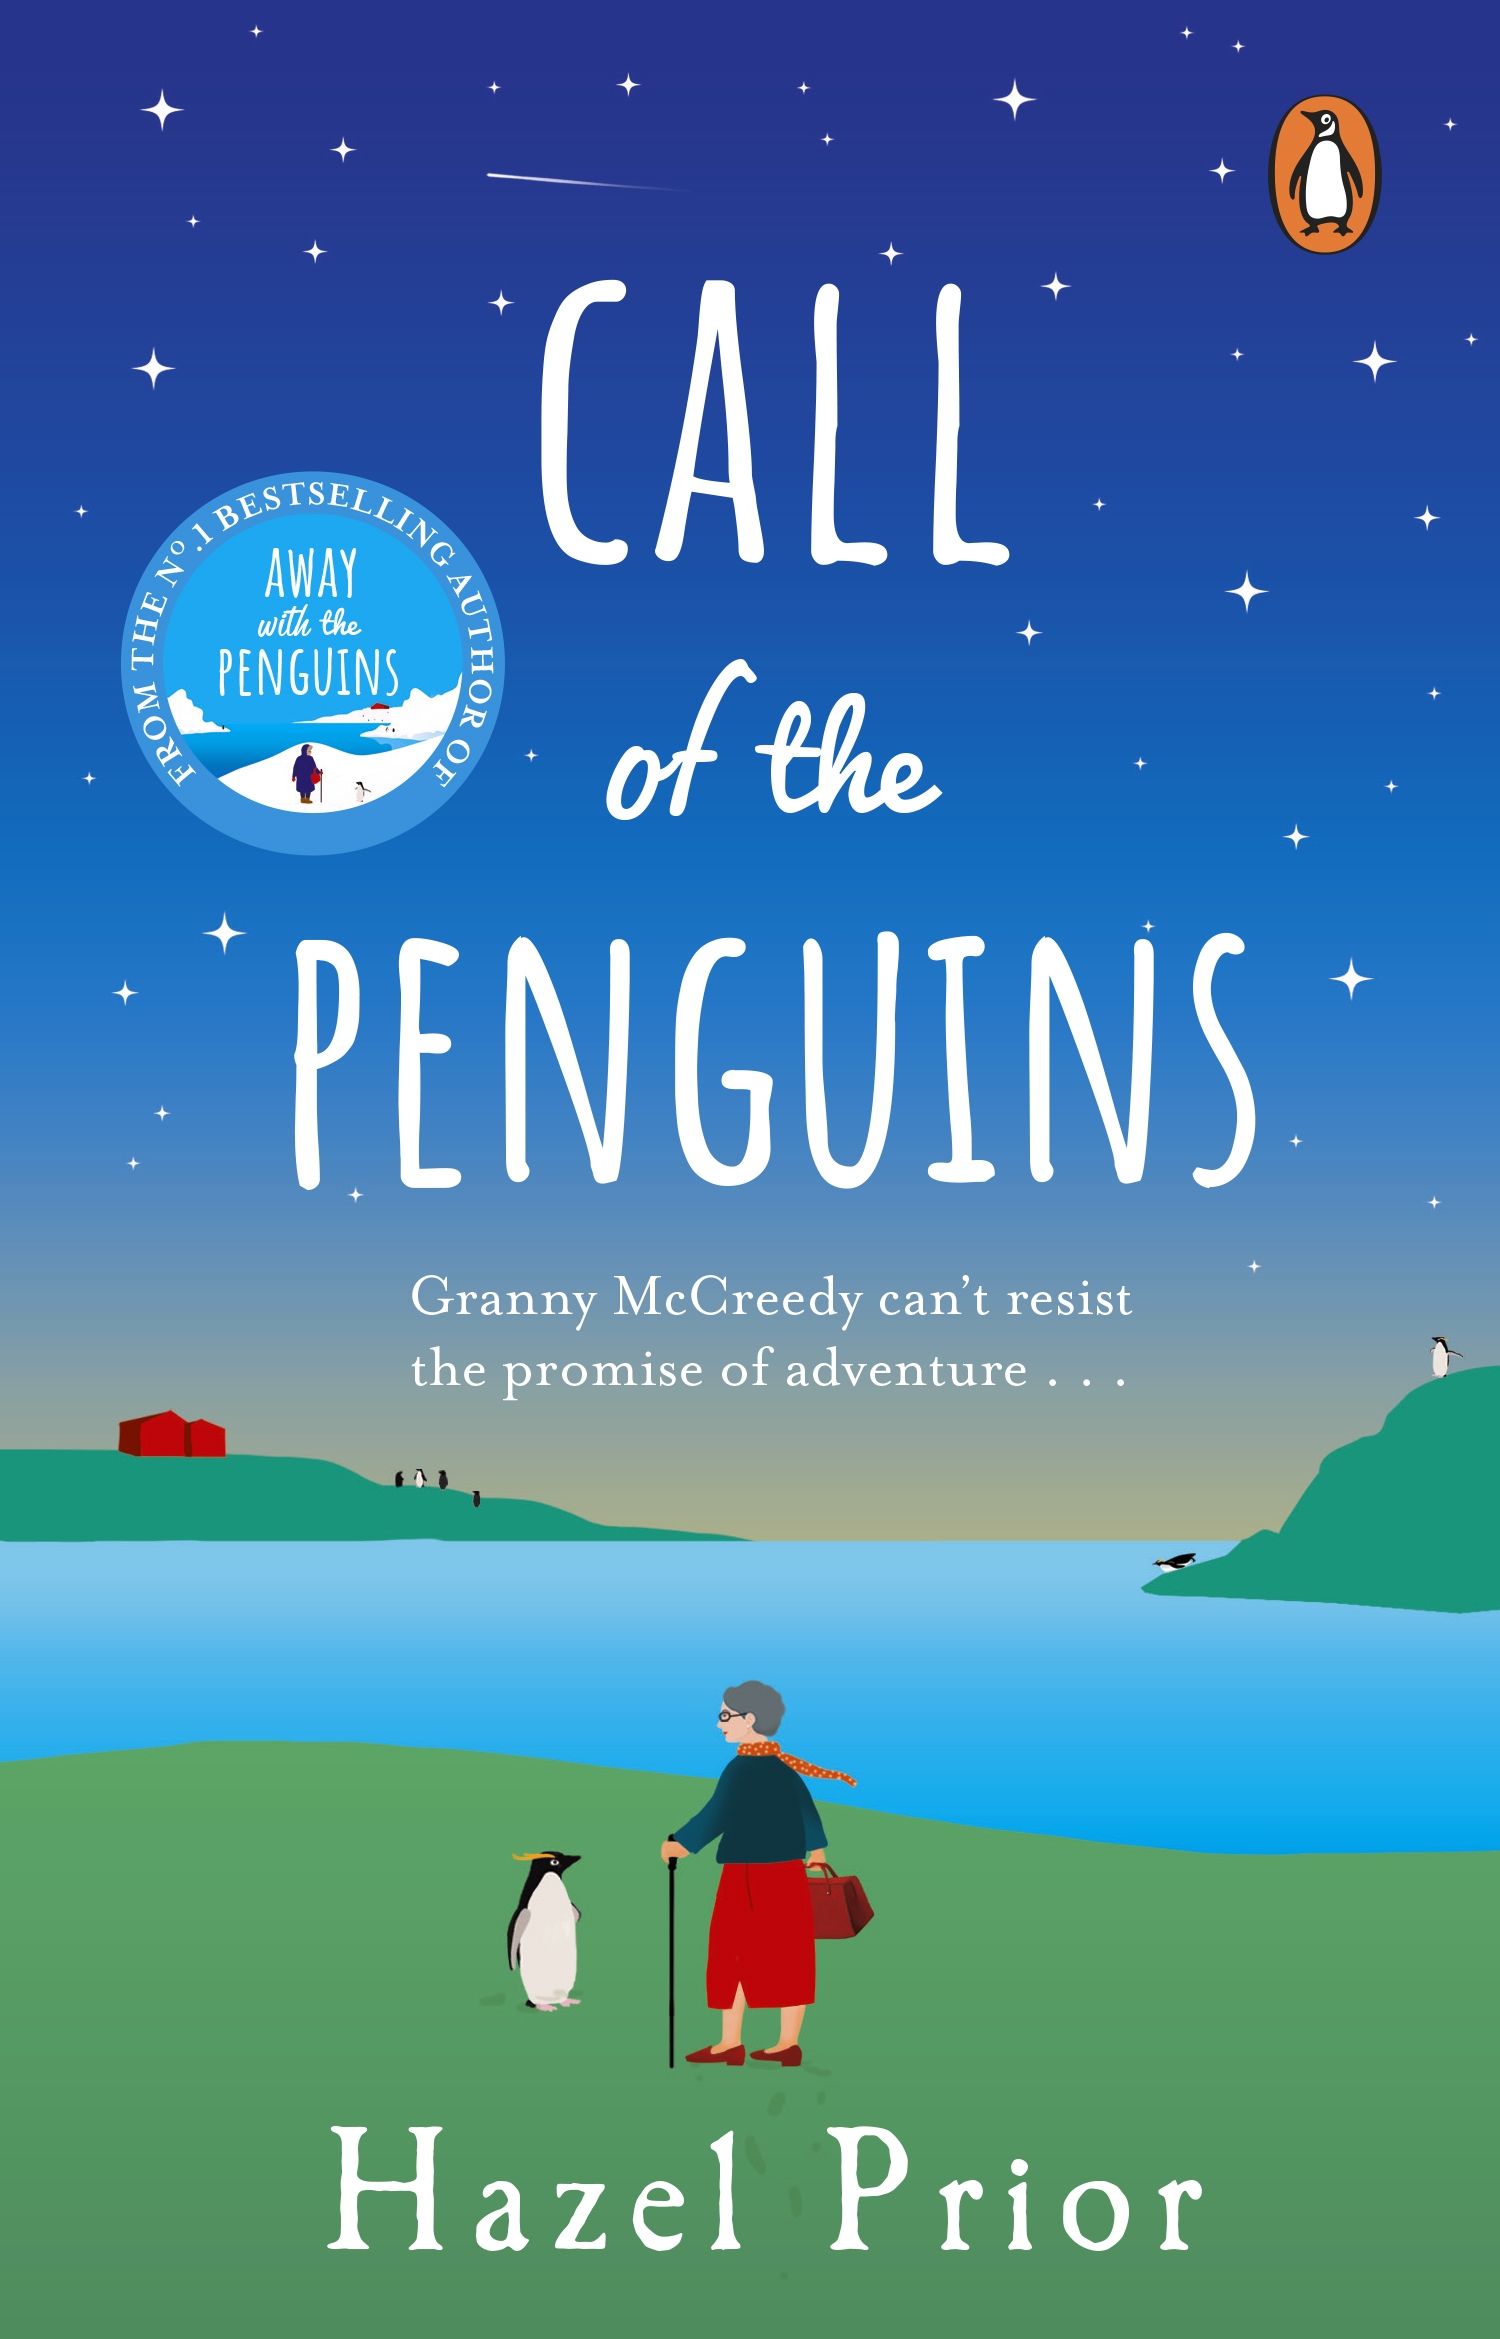 Call of the Penguins book cover image